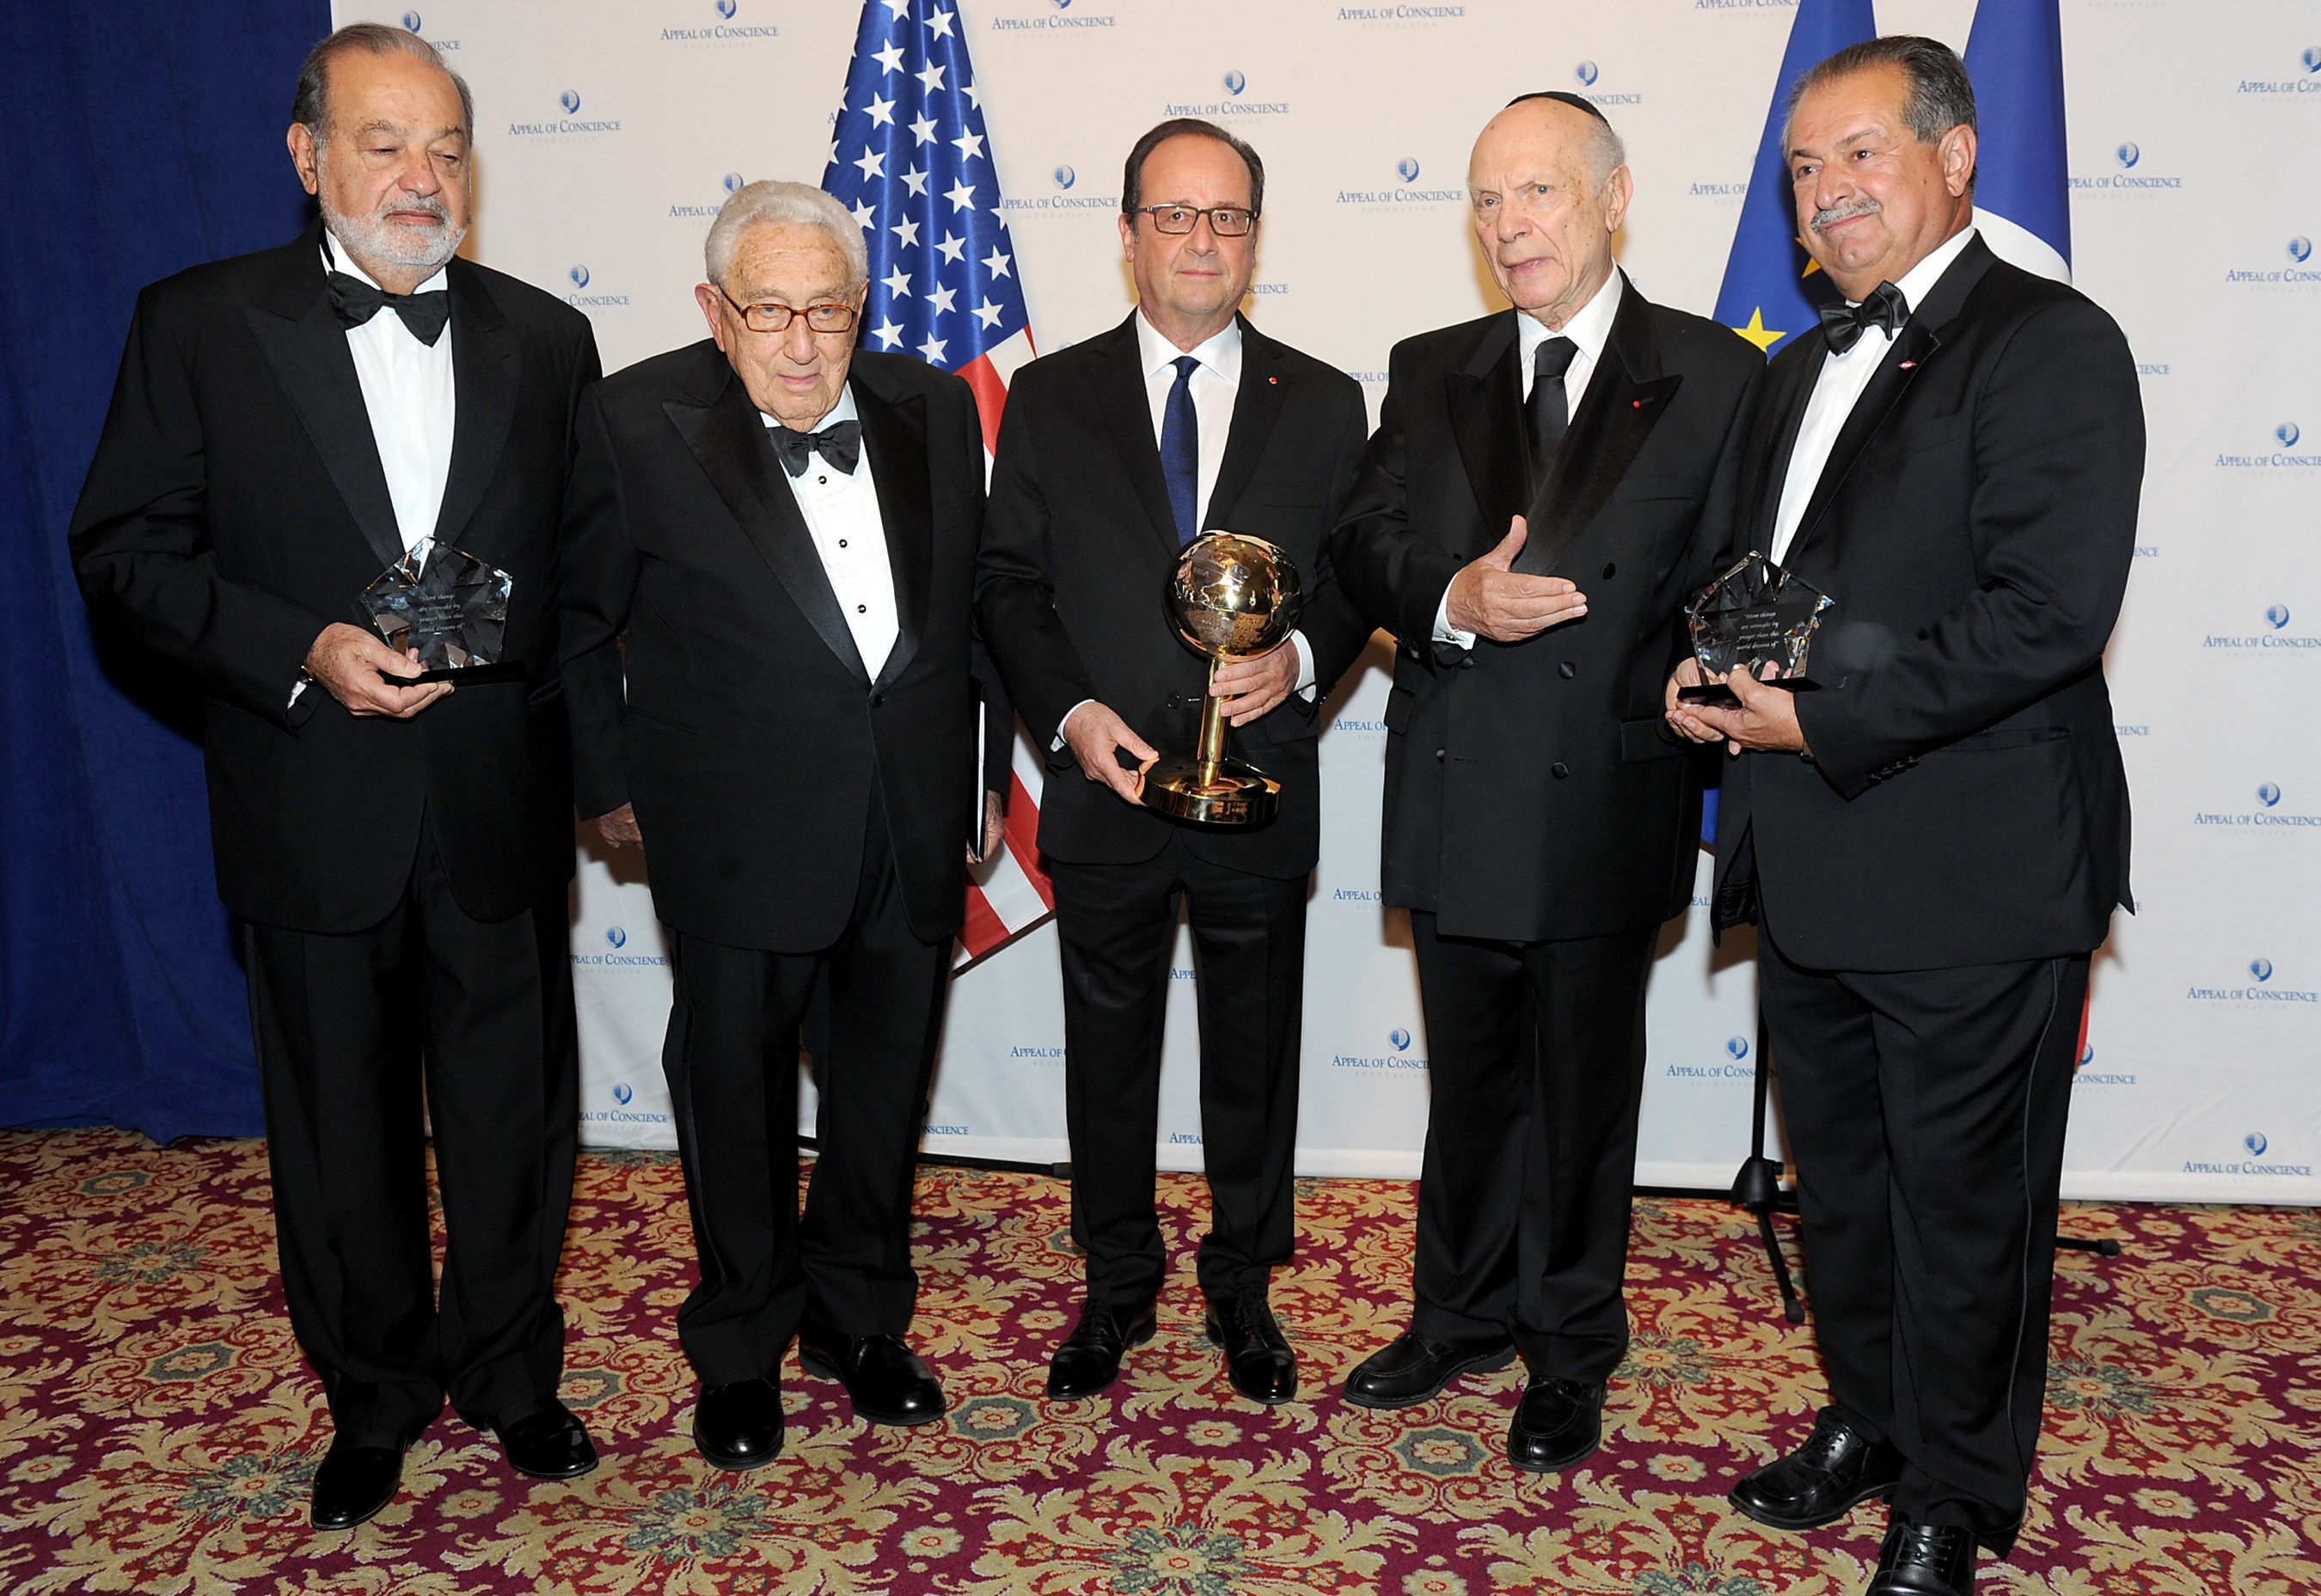 Rabbi Arthur Schneier, (2nd from right) the president and founder of the Appeal of Conscience Foundation and former United States Secretary of State, Dr. Henry Kissinger (2nd from left) present the 2016 World Statesman Award to French President, Francois Hollande (center). Mexican business magnate, investor, and philanthropist, Carlos Slim Helu (far left) and Andrew N. Liveris, the Chairman and Chief Executive Officer of The Dow Chemical Company (far right) received the 2016 Appeal of Conscience Awards at the 51st Annual Appeal of Conscience Awards Dinner held at the Waldorf Astoria in New York.